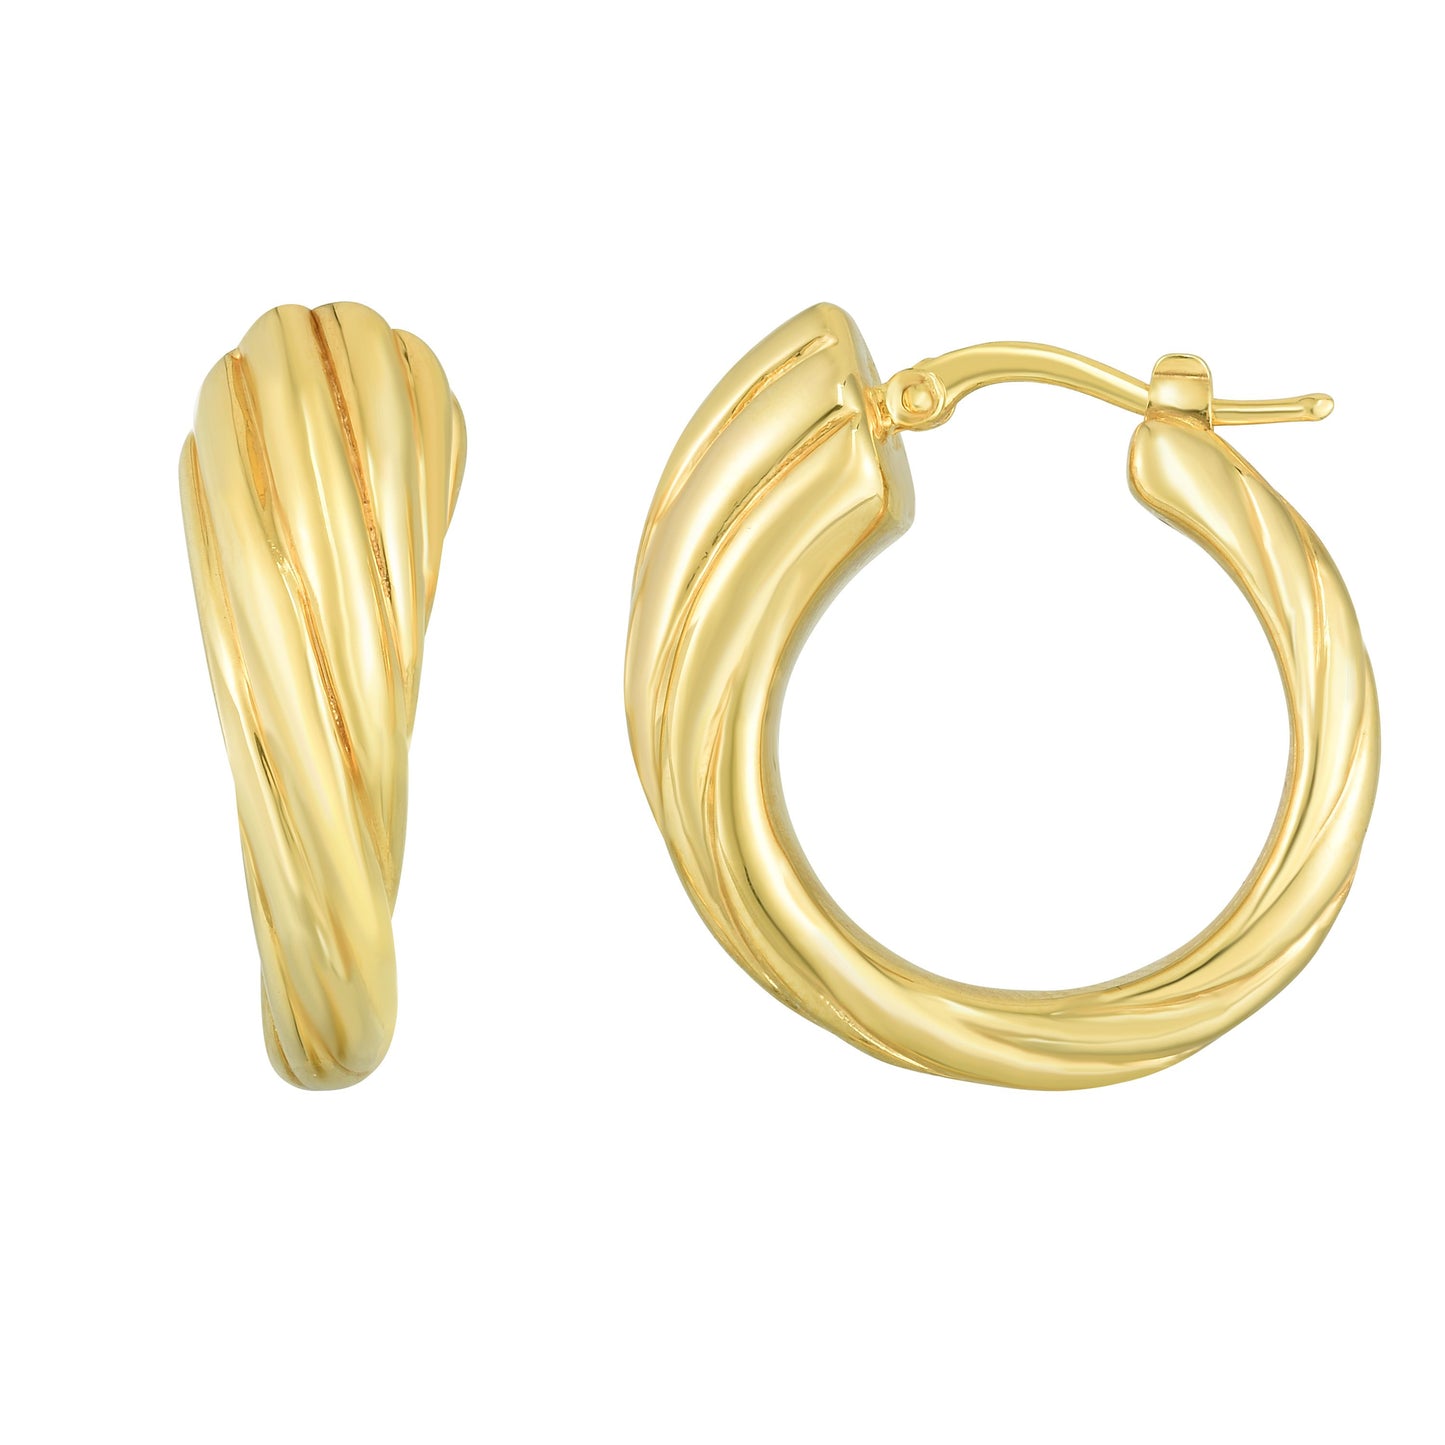 Yellow Finish Polished Graduated Hoop Swirl Earring with Hinged Clasp